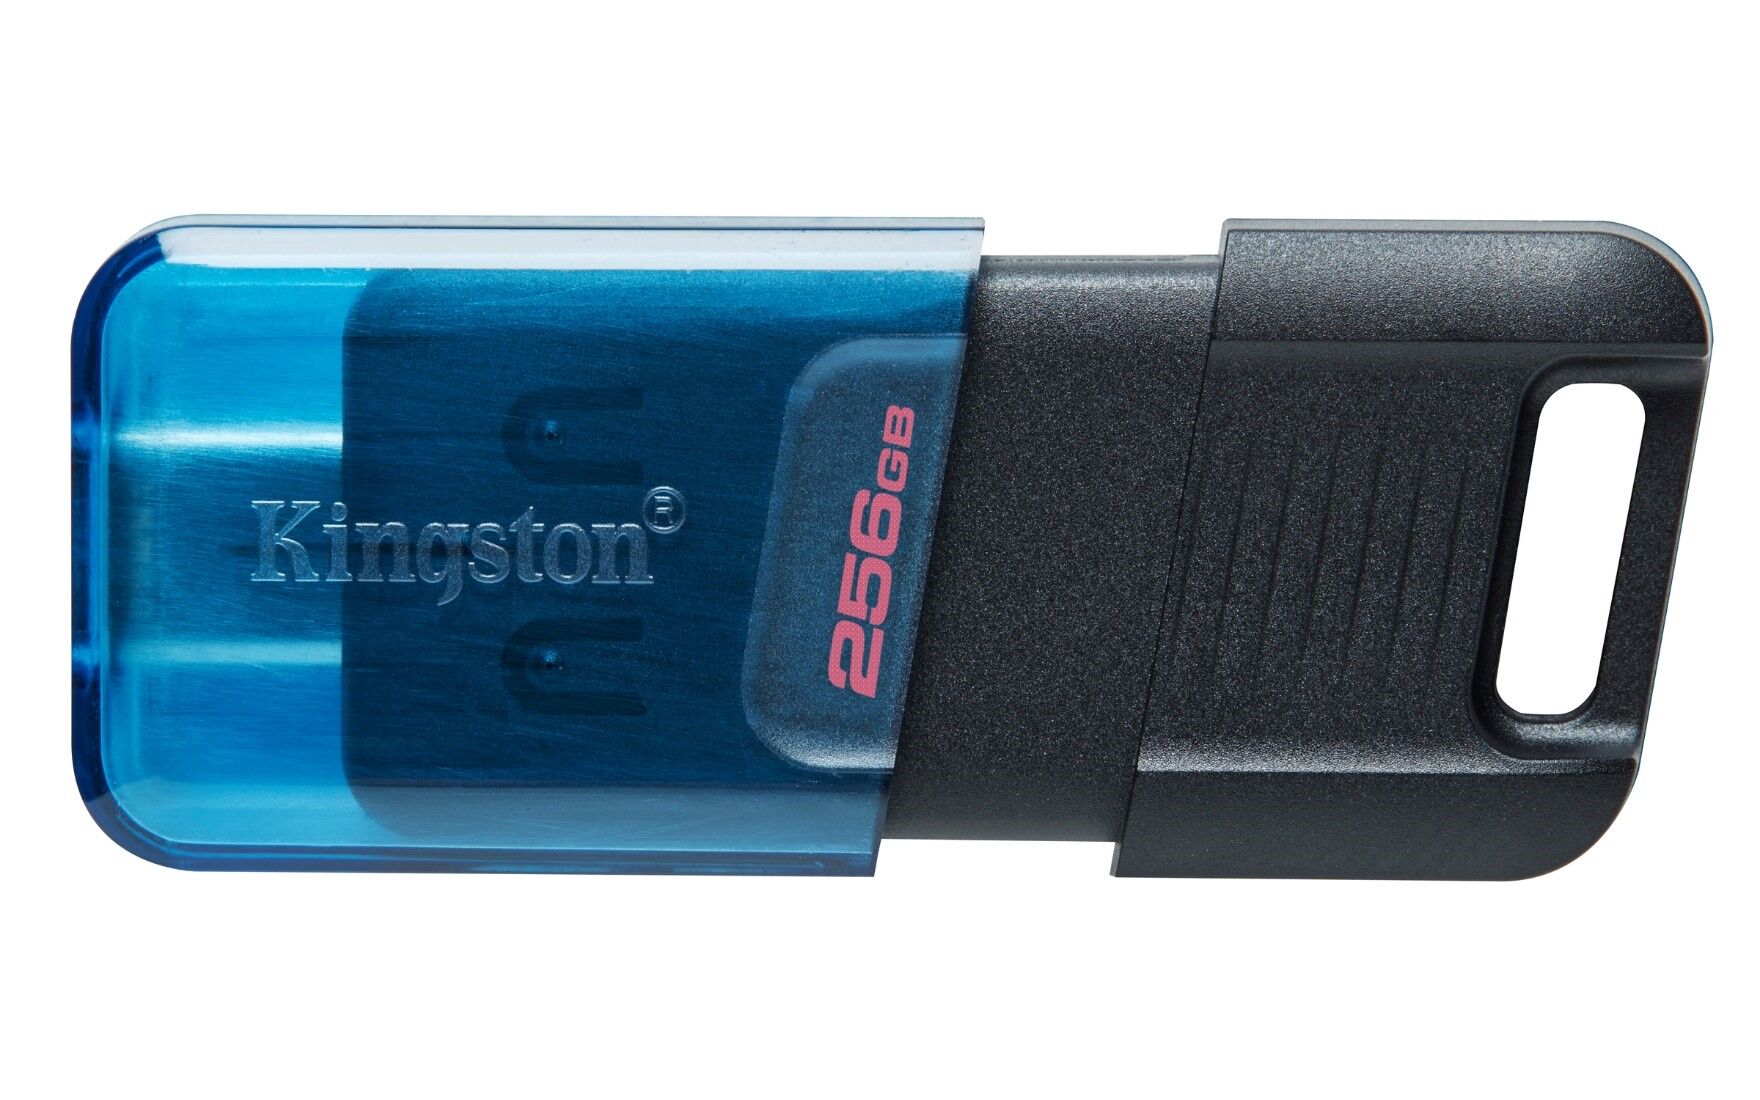 Kingston Launches Two New DataTraveler USB Drives for On-The-Go Storage 34